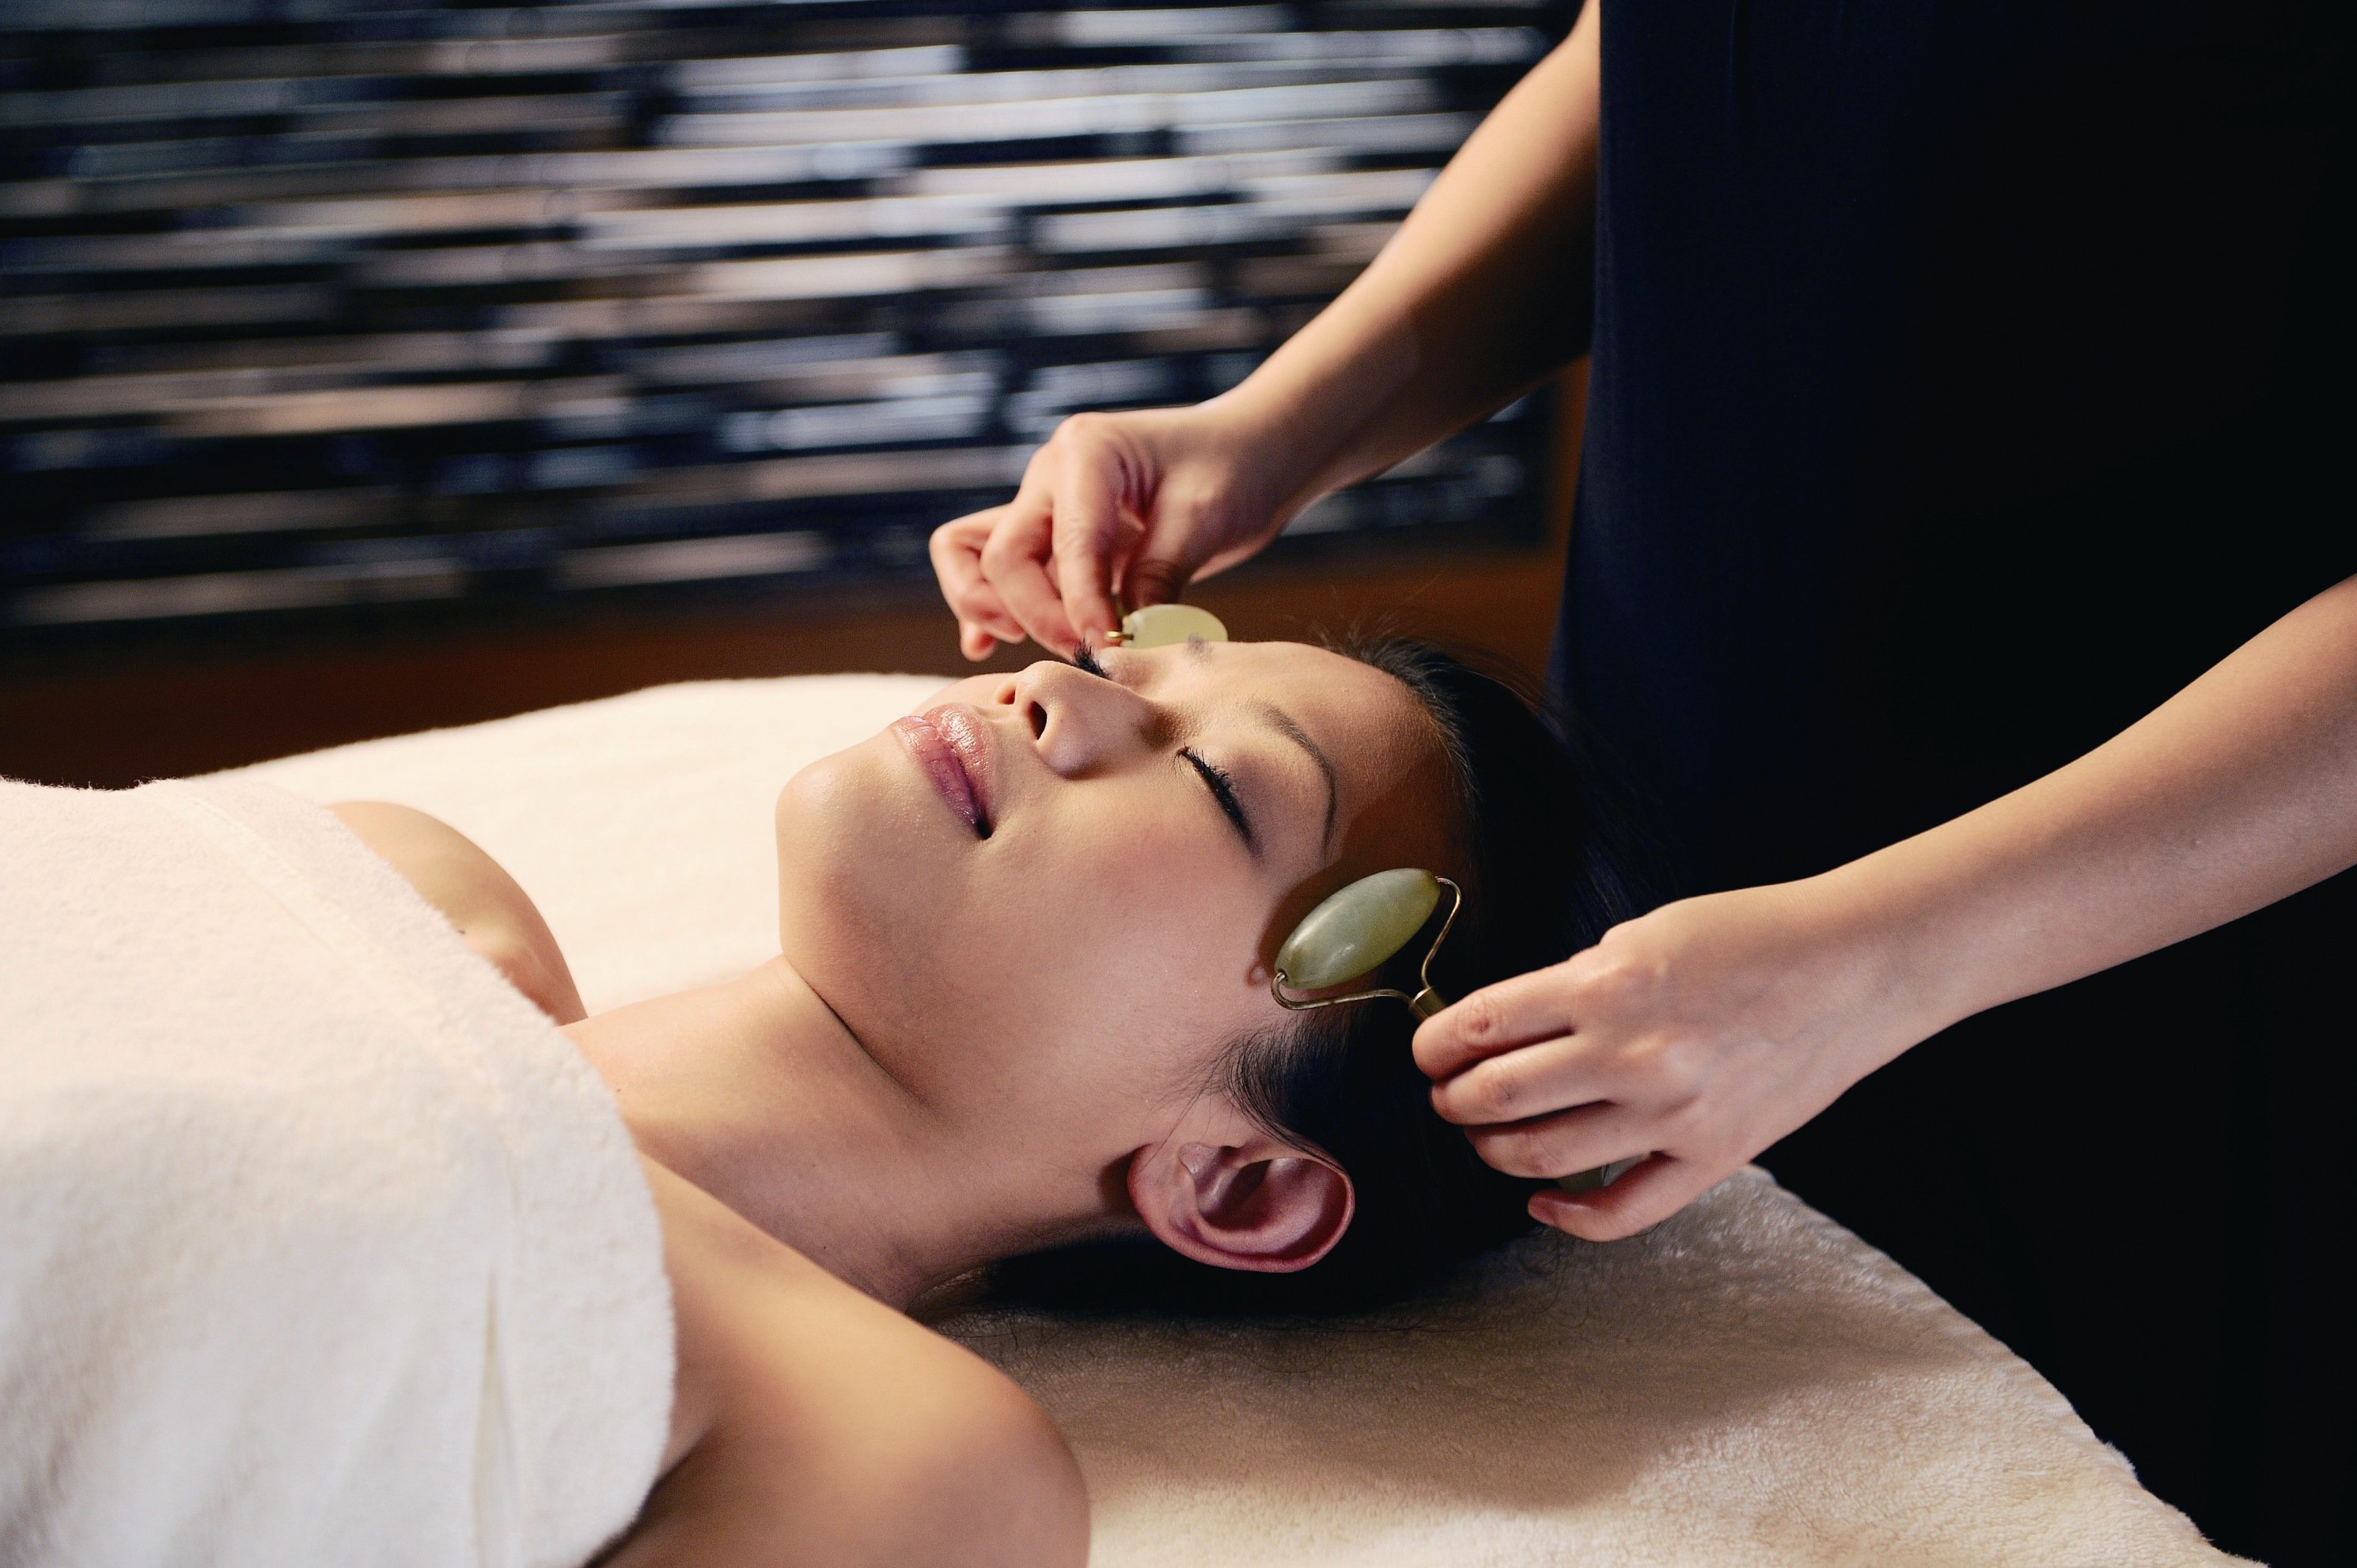 Uživatel Mandarin Oriental na Twitteru: „Experience @MO_HKG's Legendary Spa  Service, the 'Imperial Jade Treatment'. The treatment begins with herbal  compress & reflexology to open meridian energy lines, followed by a  Chinese-style massage